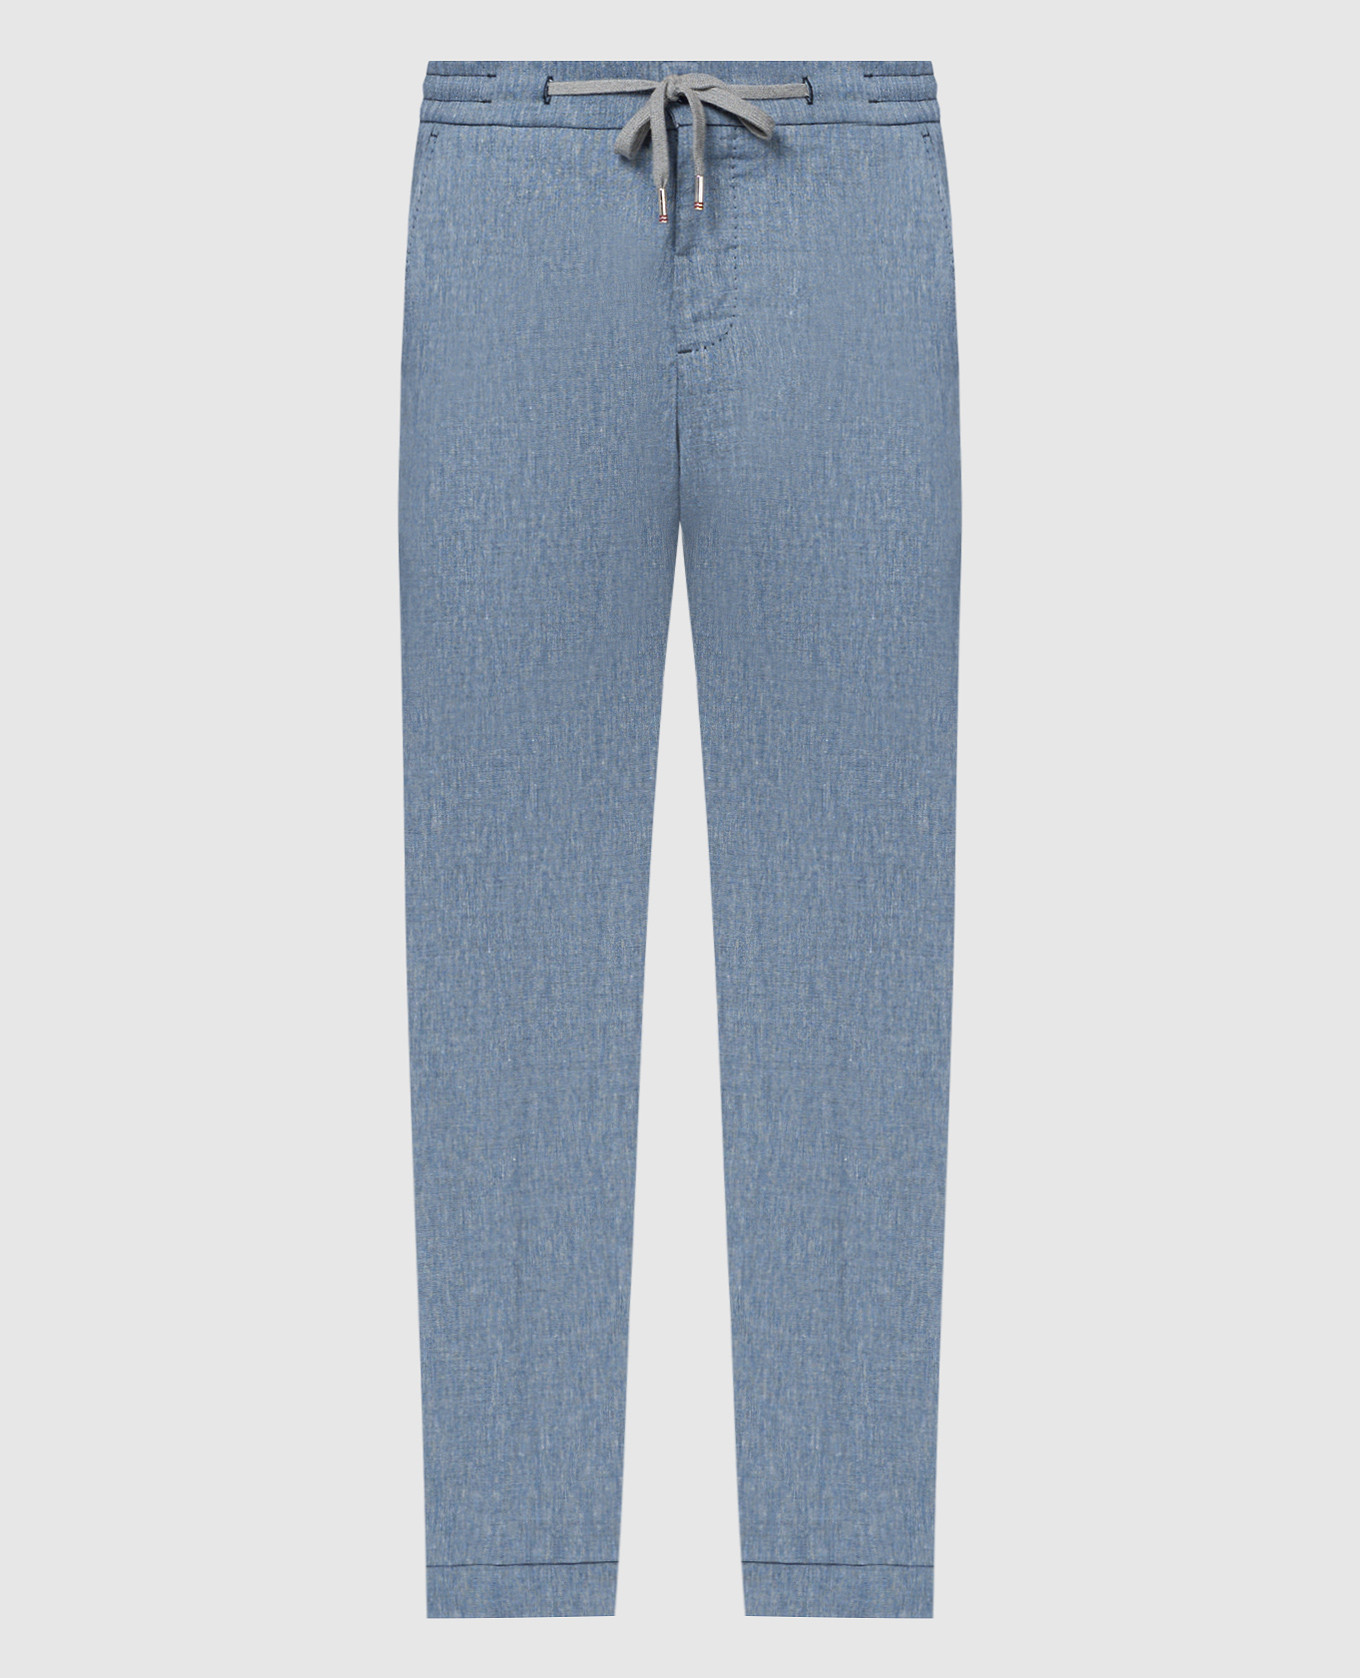 CARACCIOLO blue pants with cashmere and linen